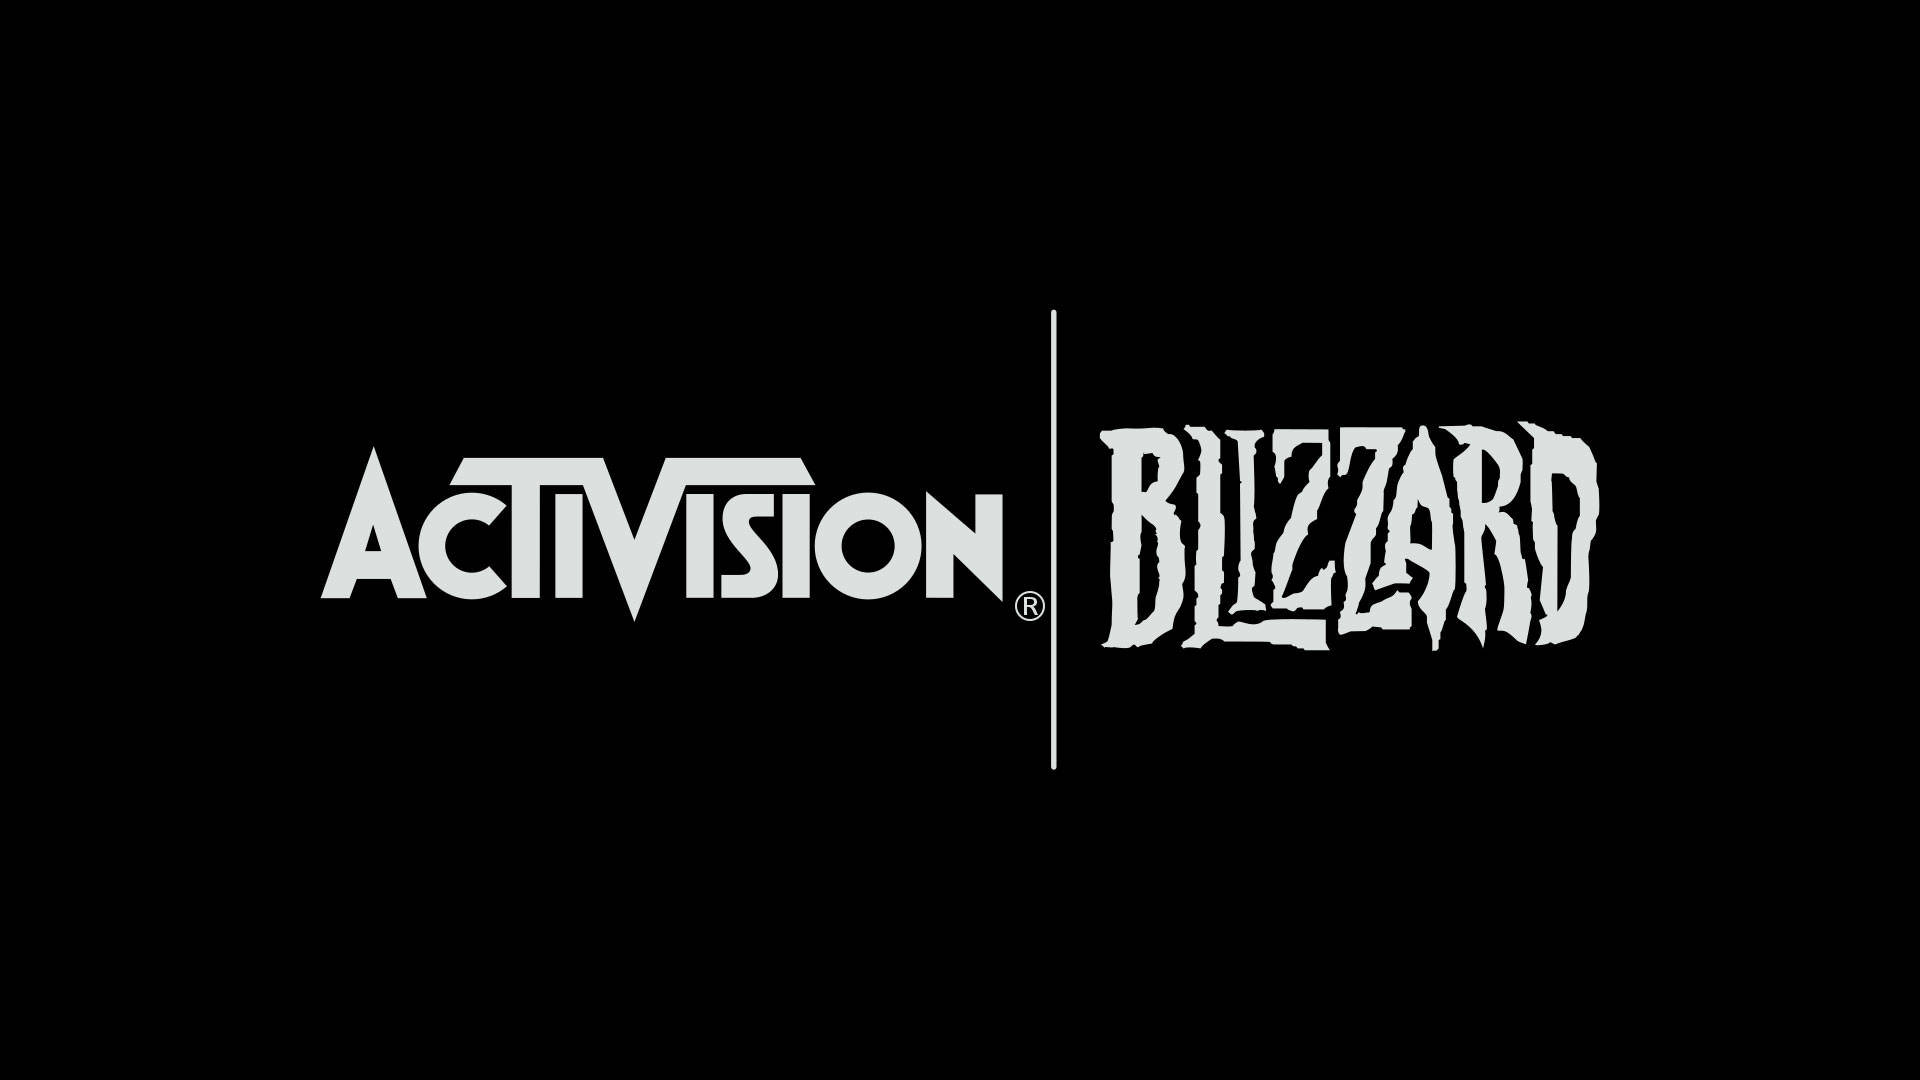 Image for Current and former Activision Blizzard staffers issue demands to management